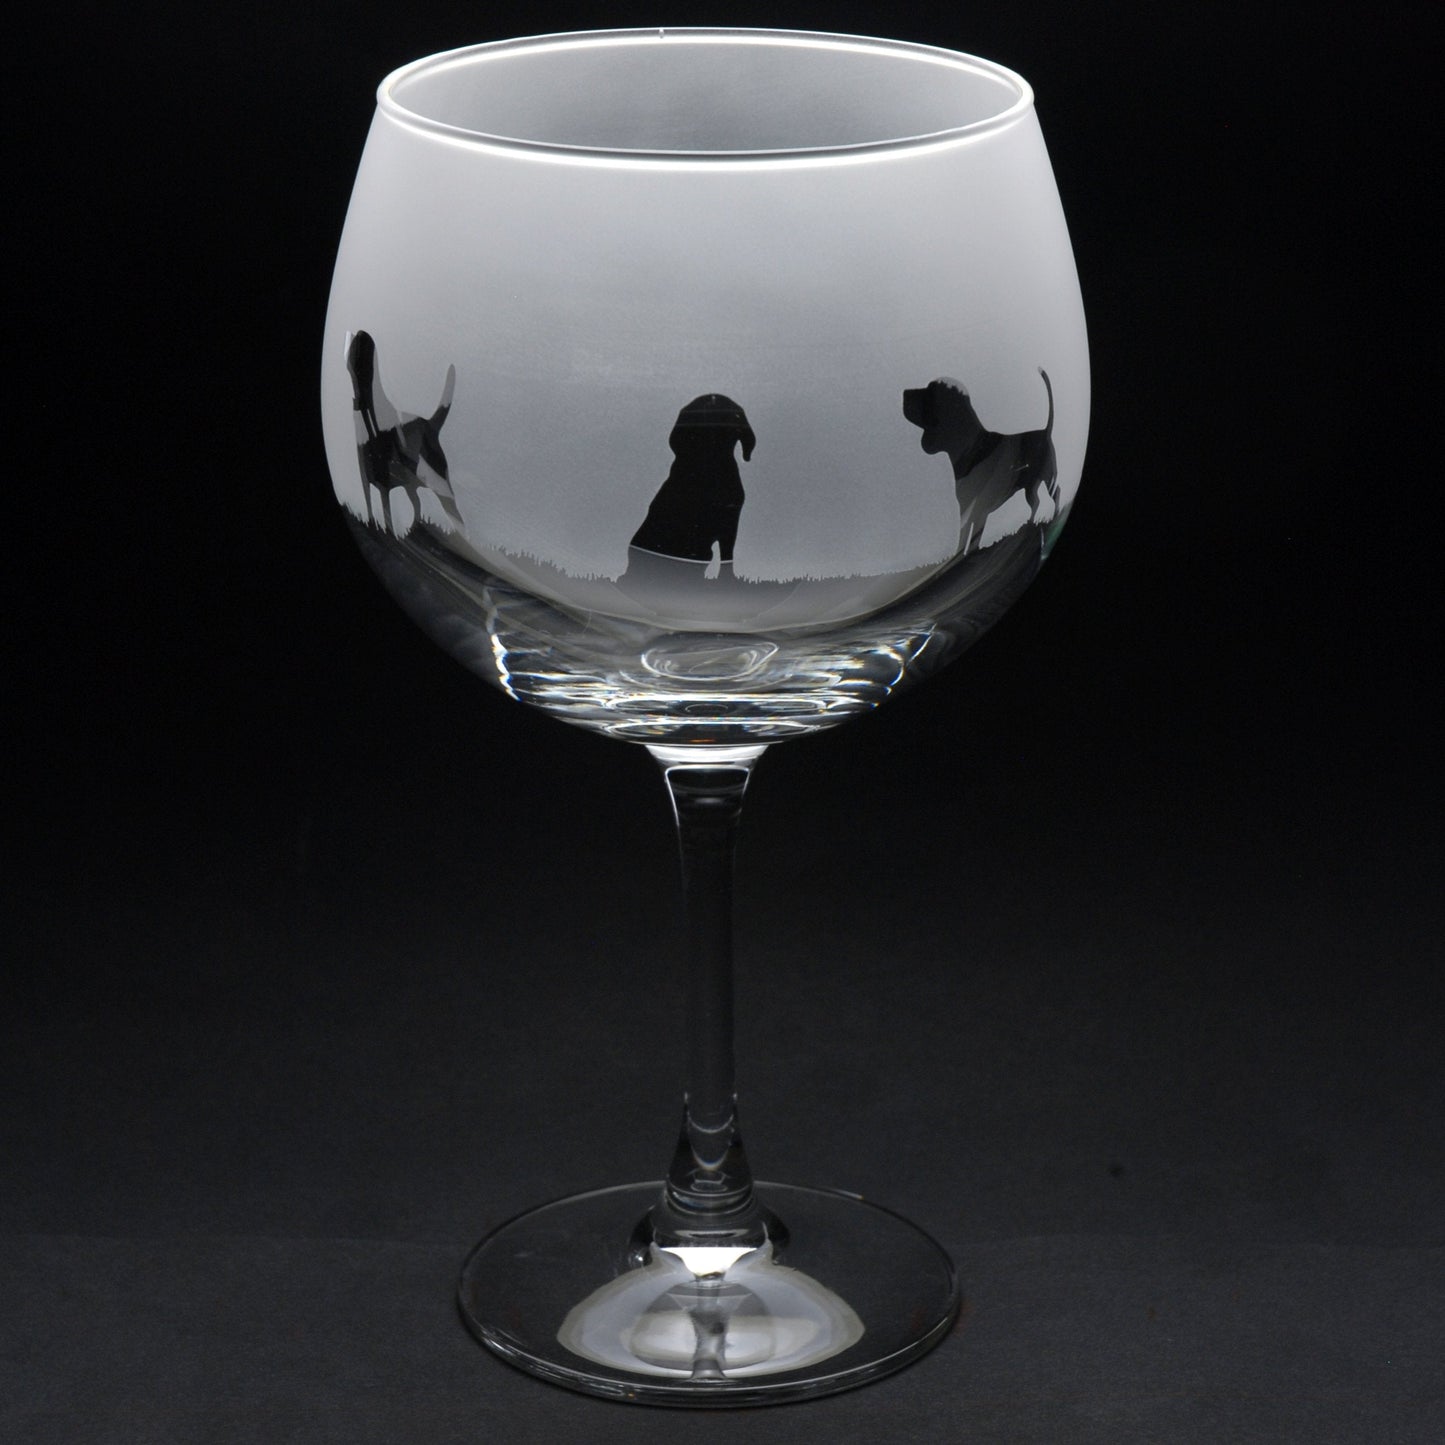 Beagle Dog Gin Cocktail Glass - Hand Etched/Engraved Gift